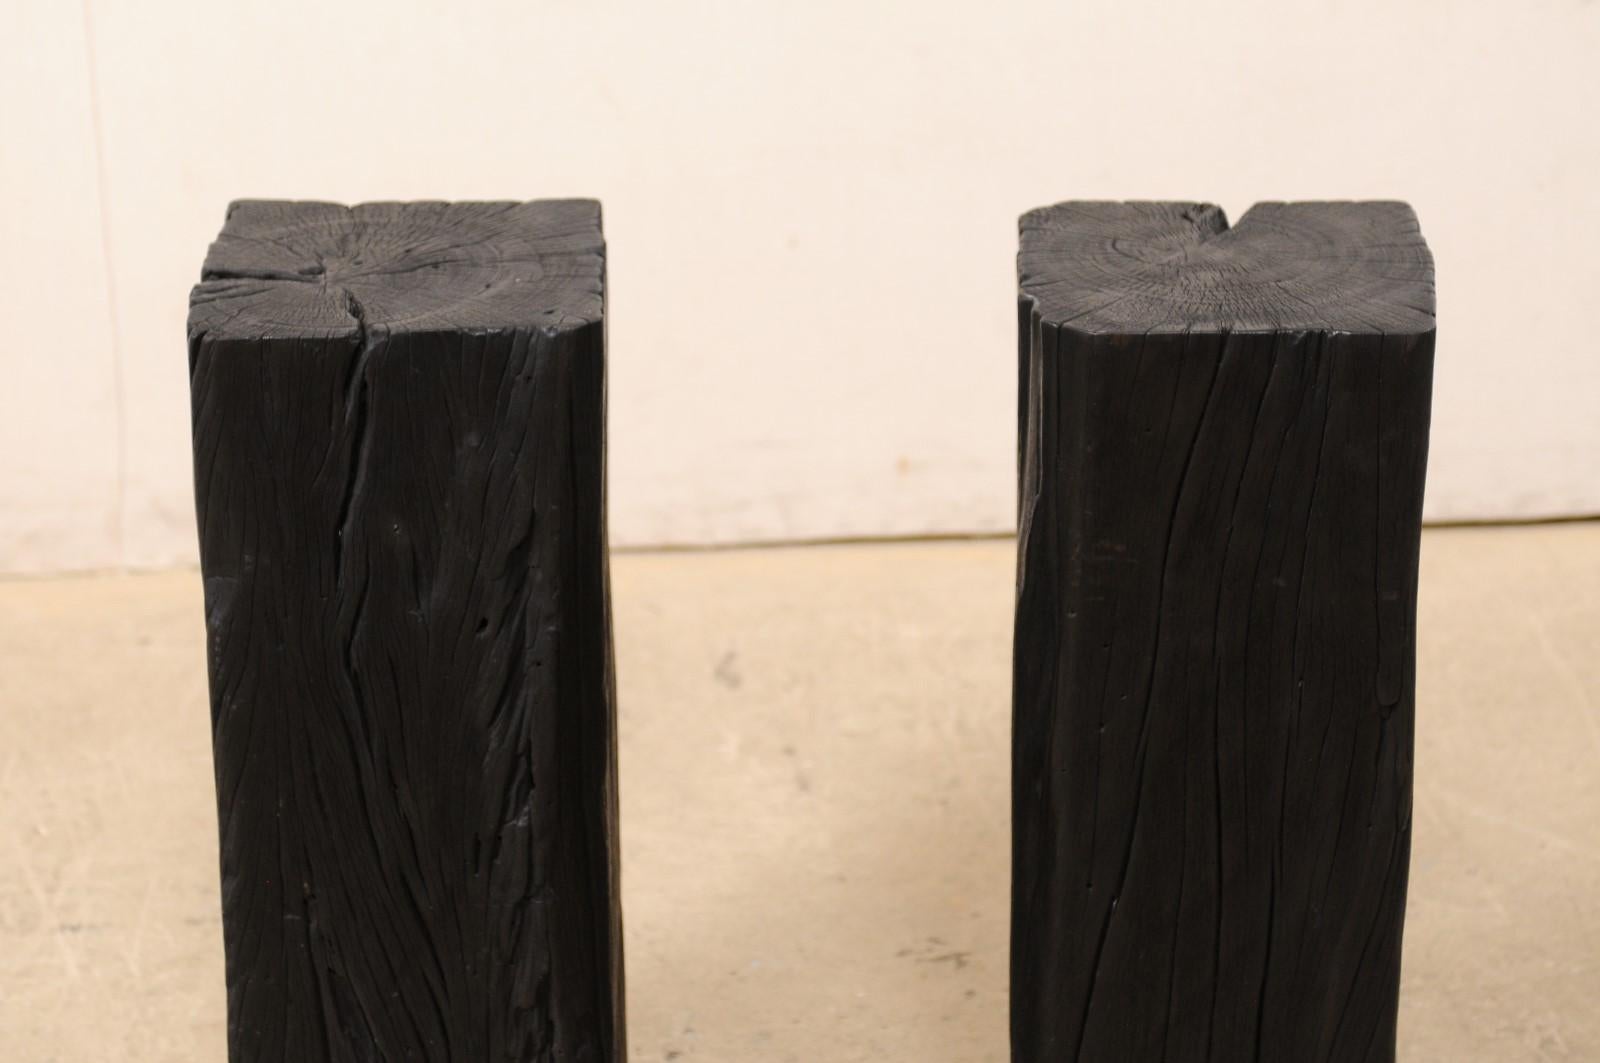 Pair of Tall Carbonized Wood Square Shaped Pedestals, Rich Black Color 1